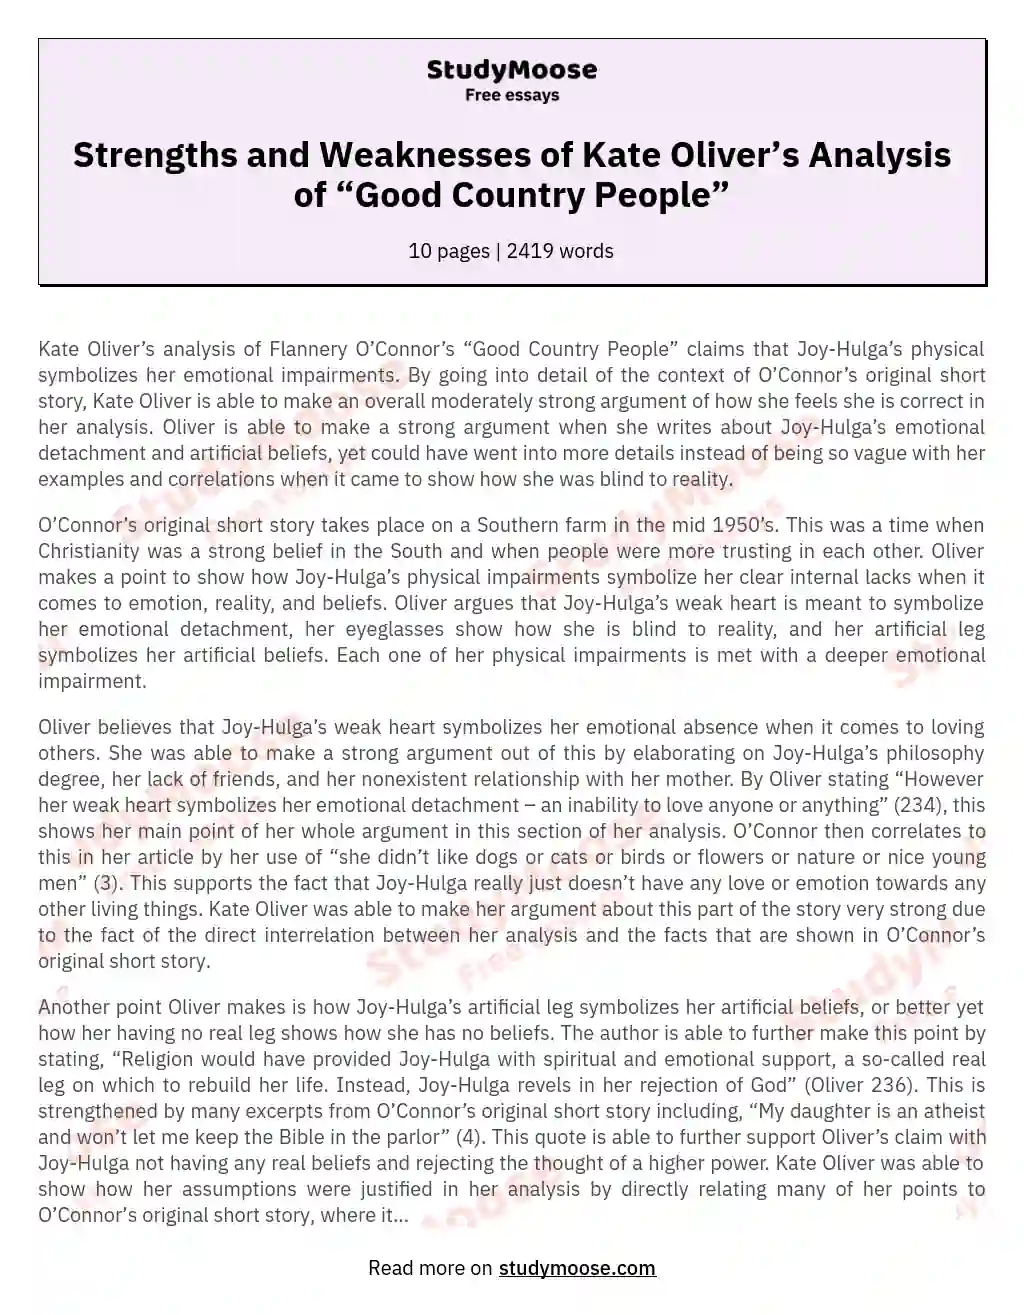 Strengths and Weaknesses of Kate Oliver’s Analysis of “Good Country People”